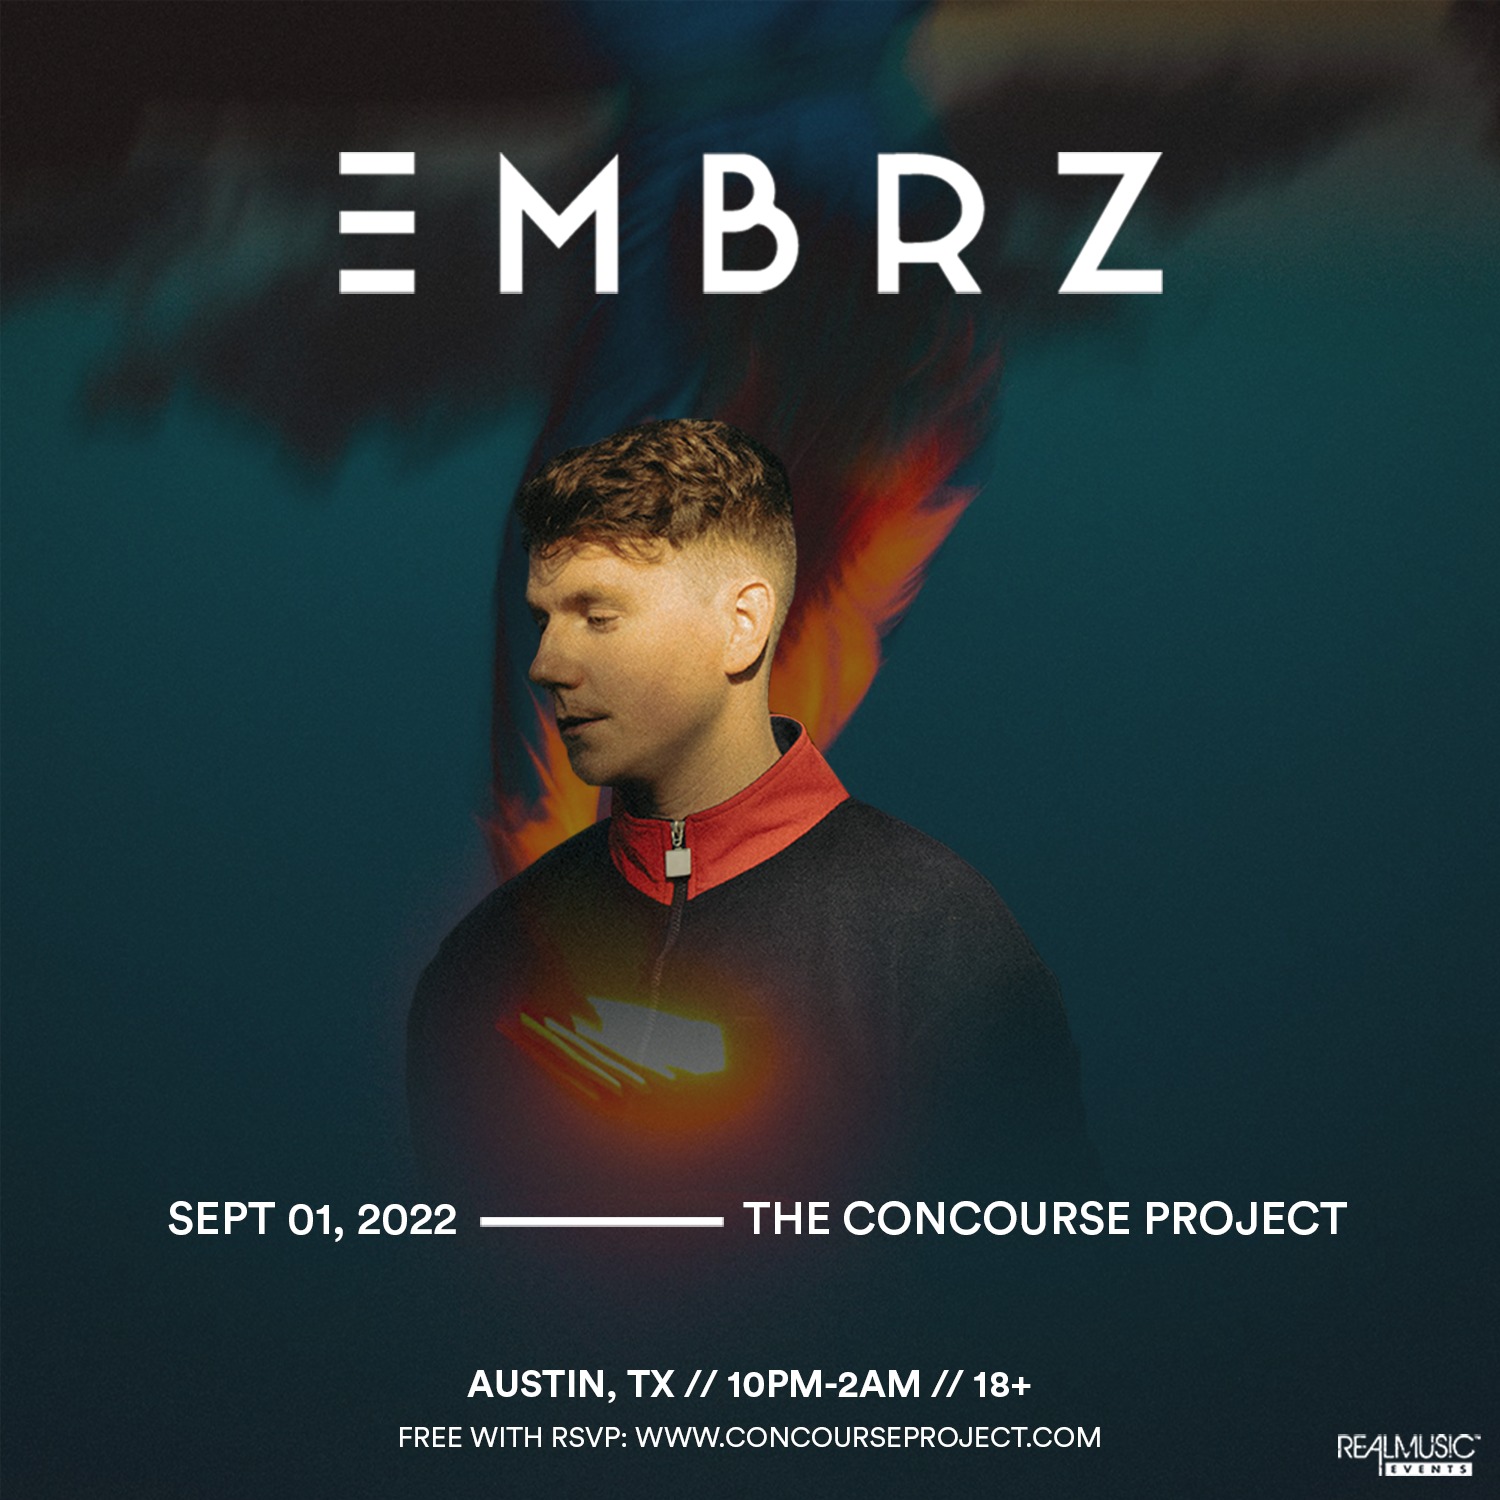 FREE SHOW: EMBRZ at The Concourse Project